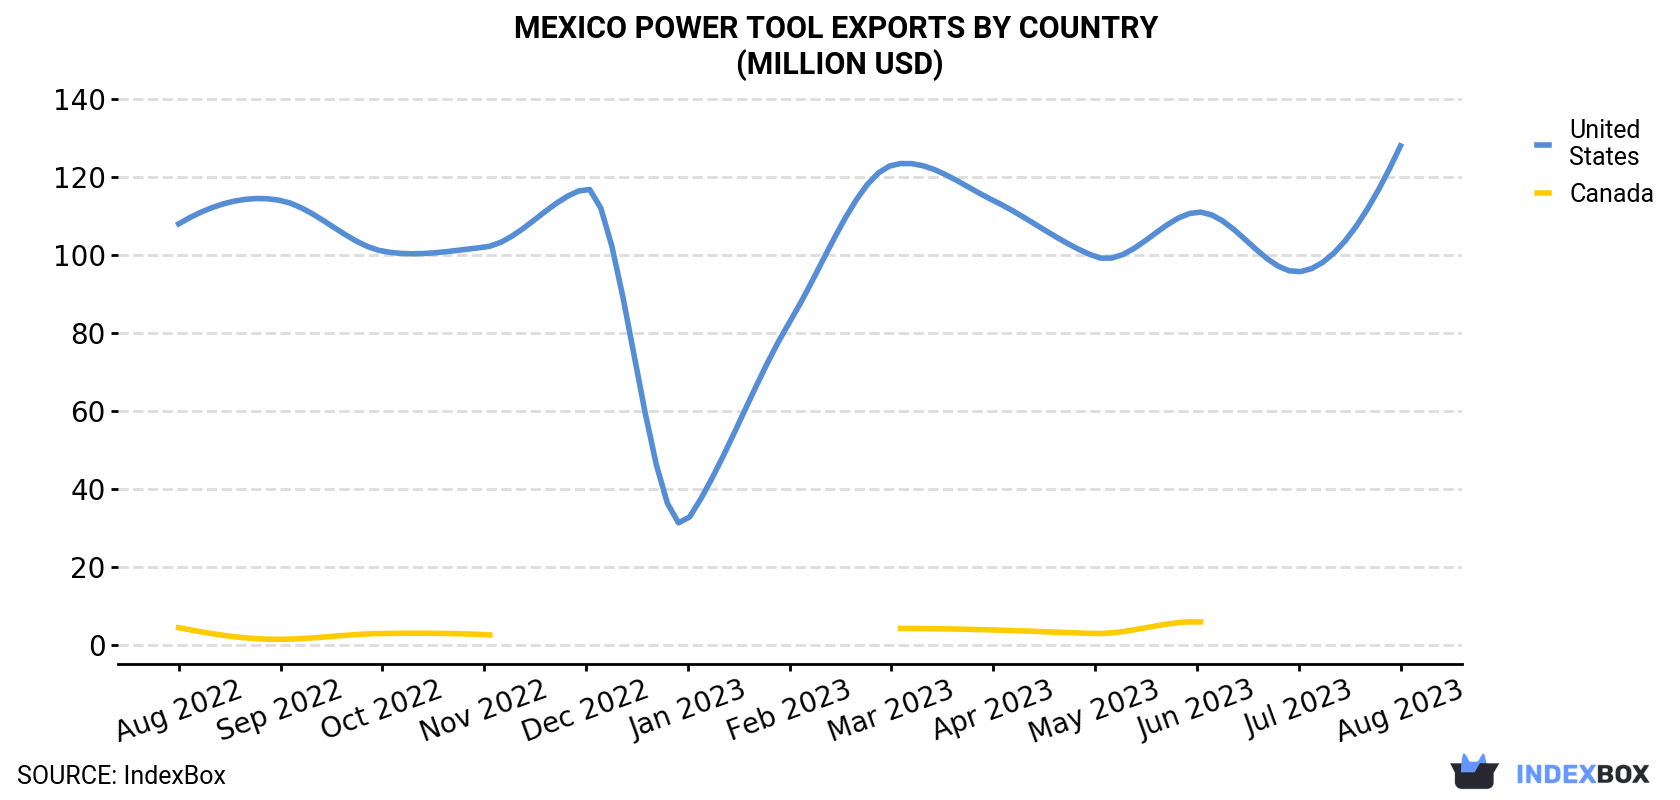 Mexico Power Tool Exports By Country (Million USD)